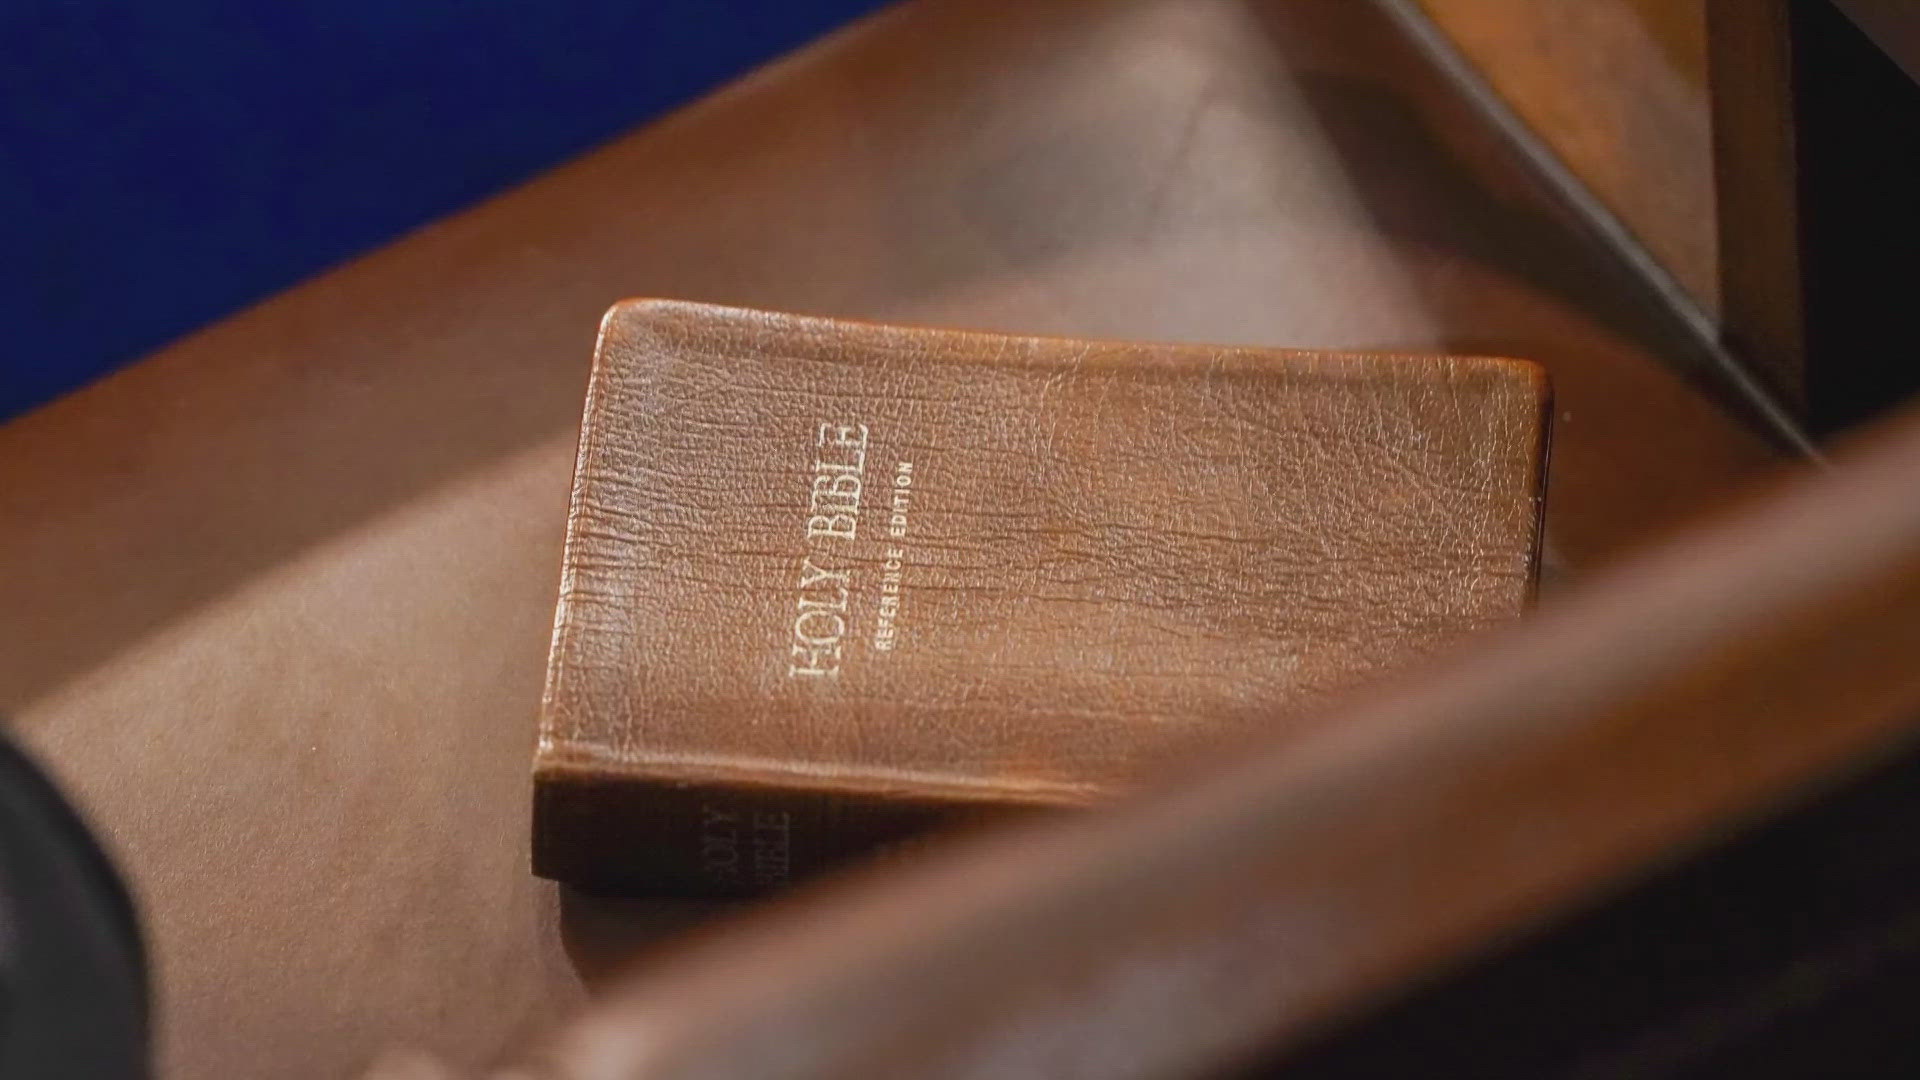 Oklahoma Schools Ordered to Incorporate Bible in Curriculum